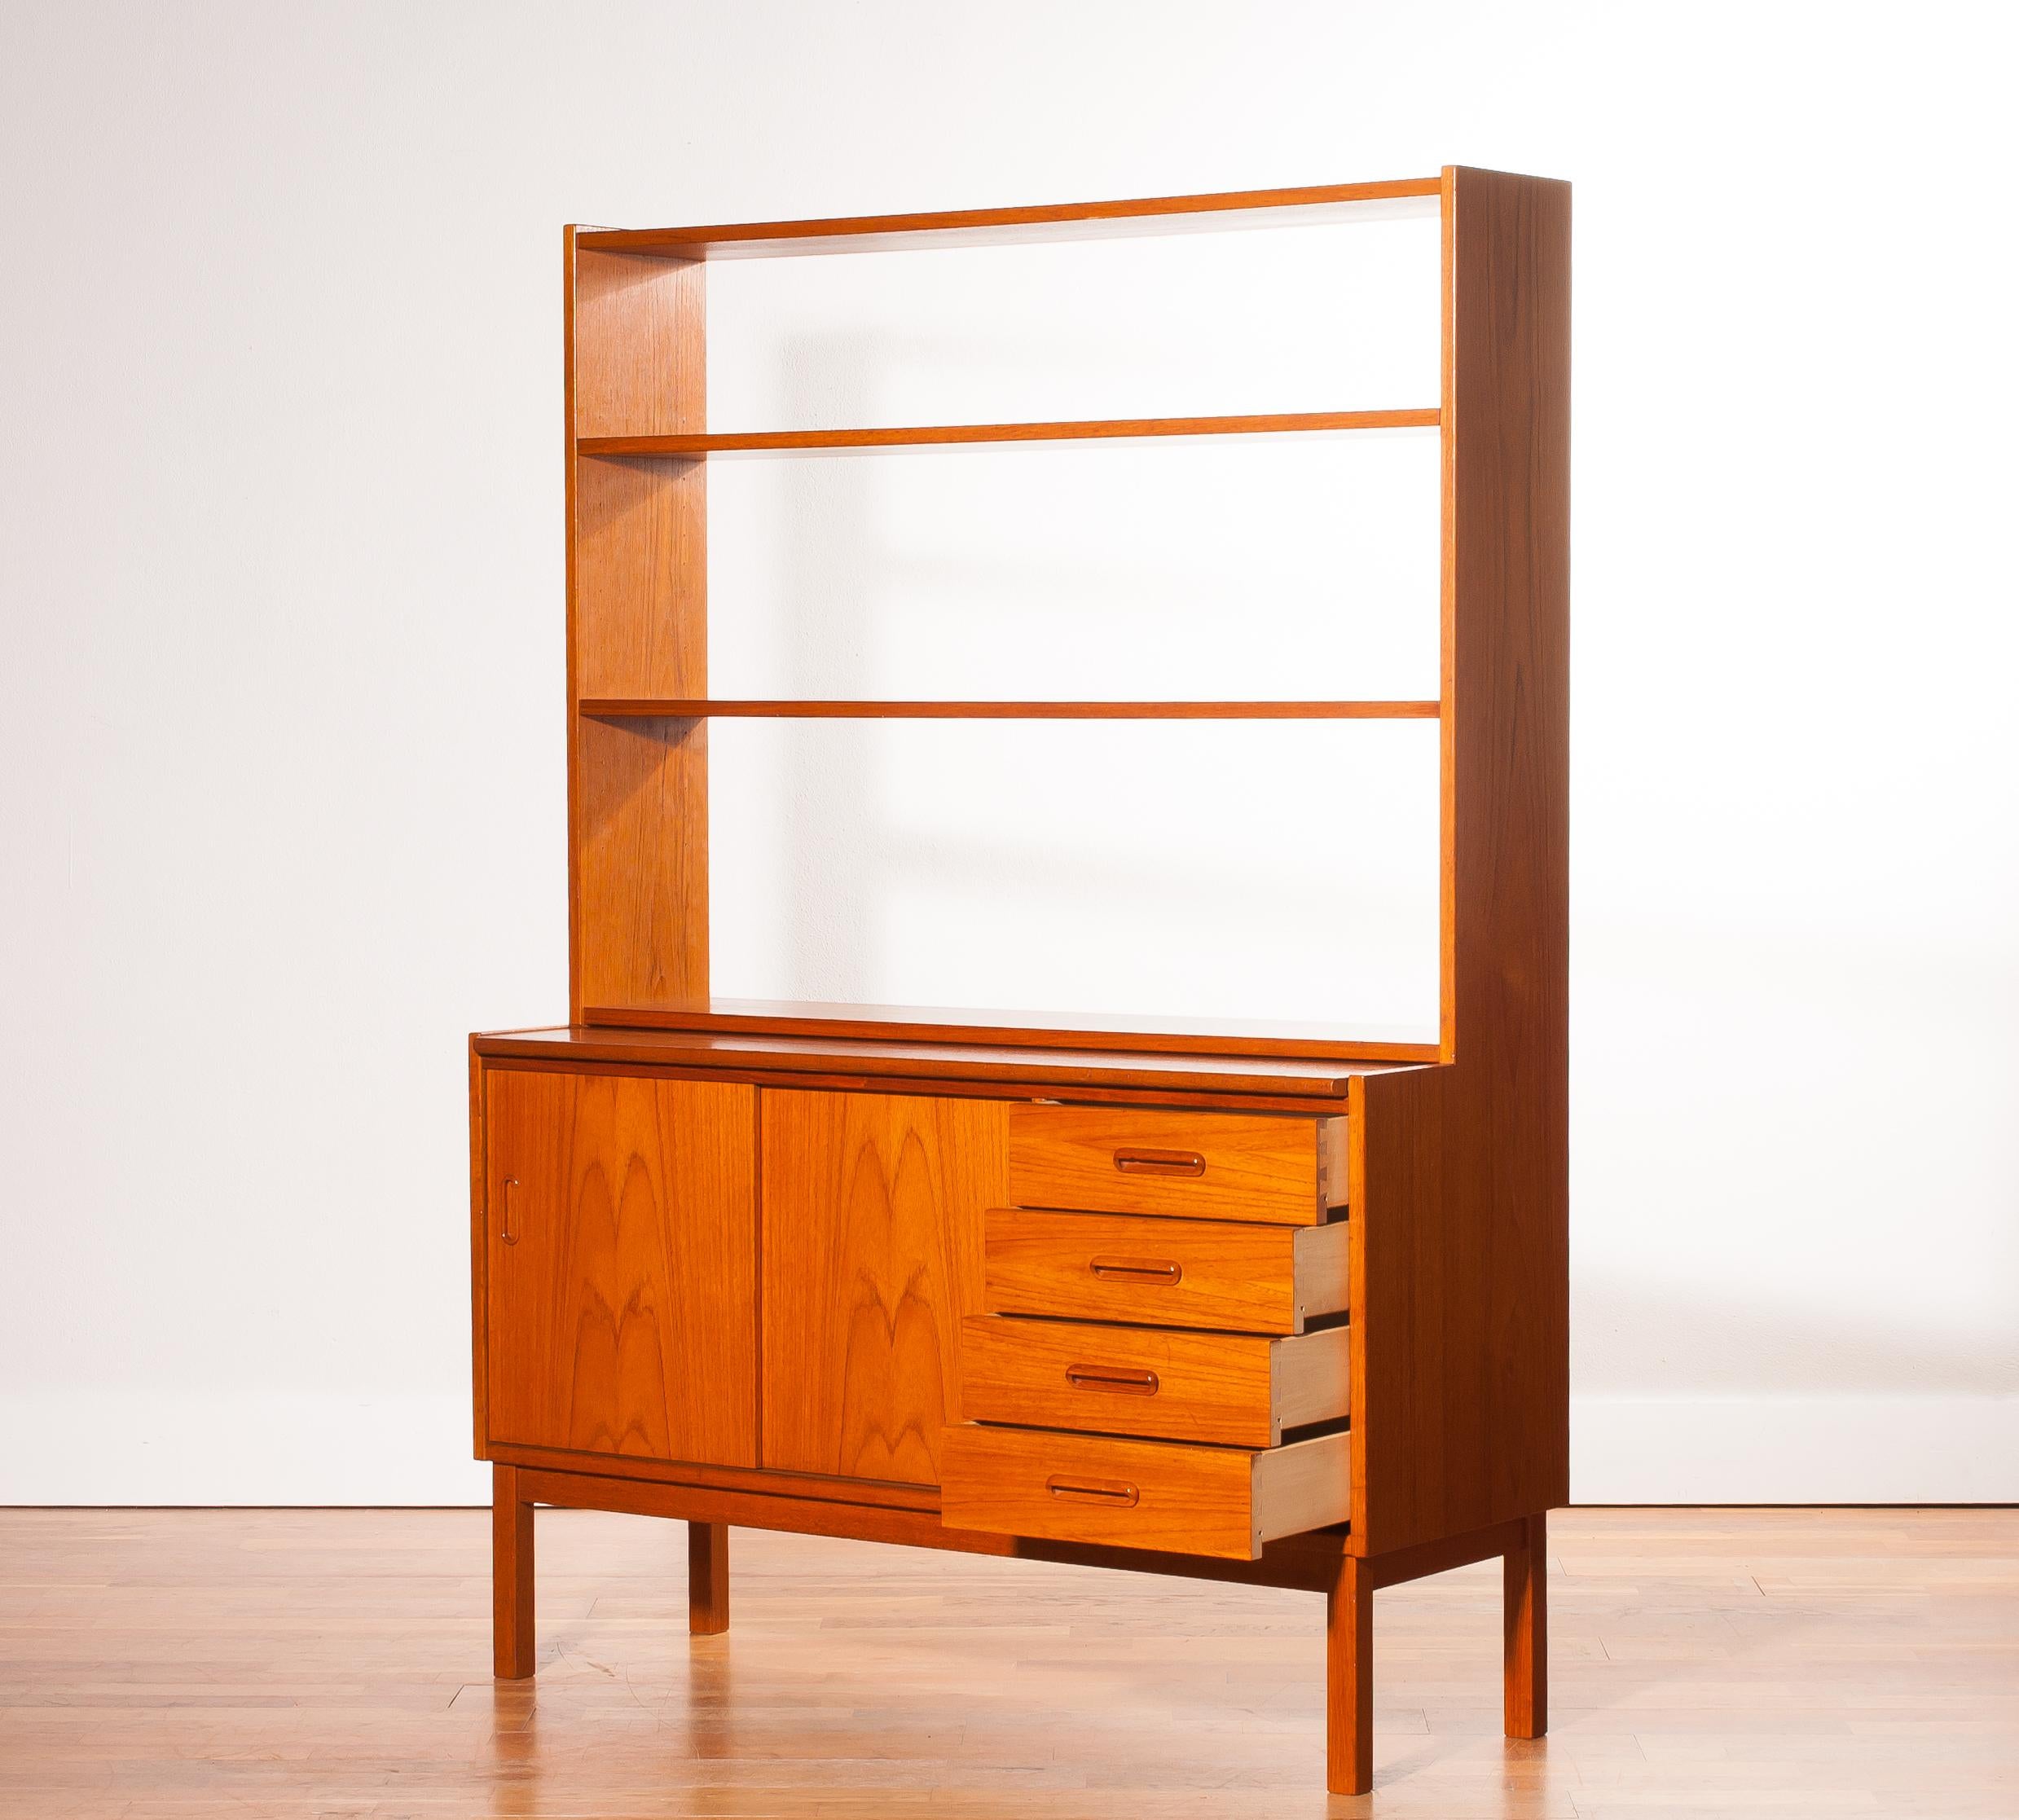 Mid-20th Century 1960s, Teak Bookcase with Slidable Writing or Working Space from Sweden